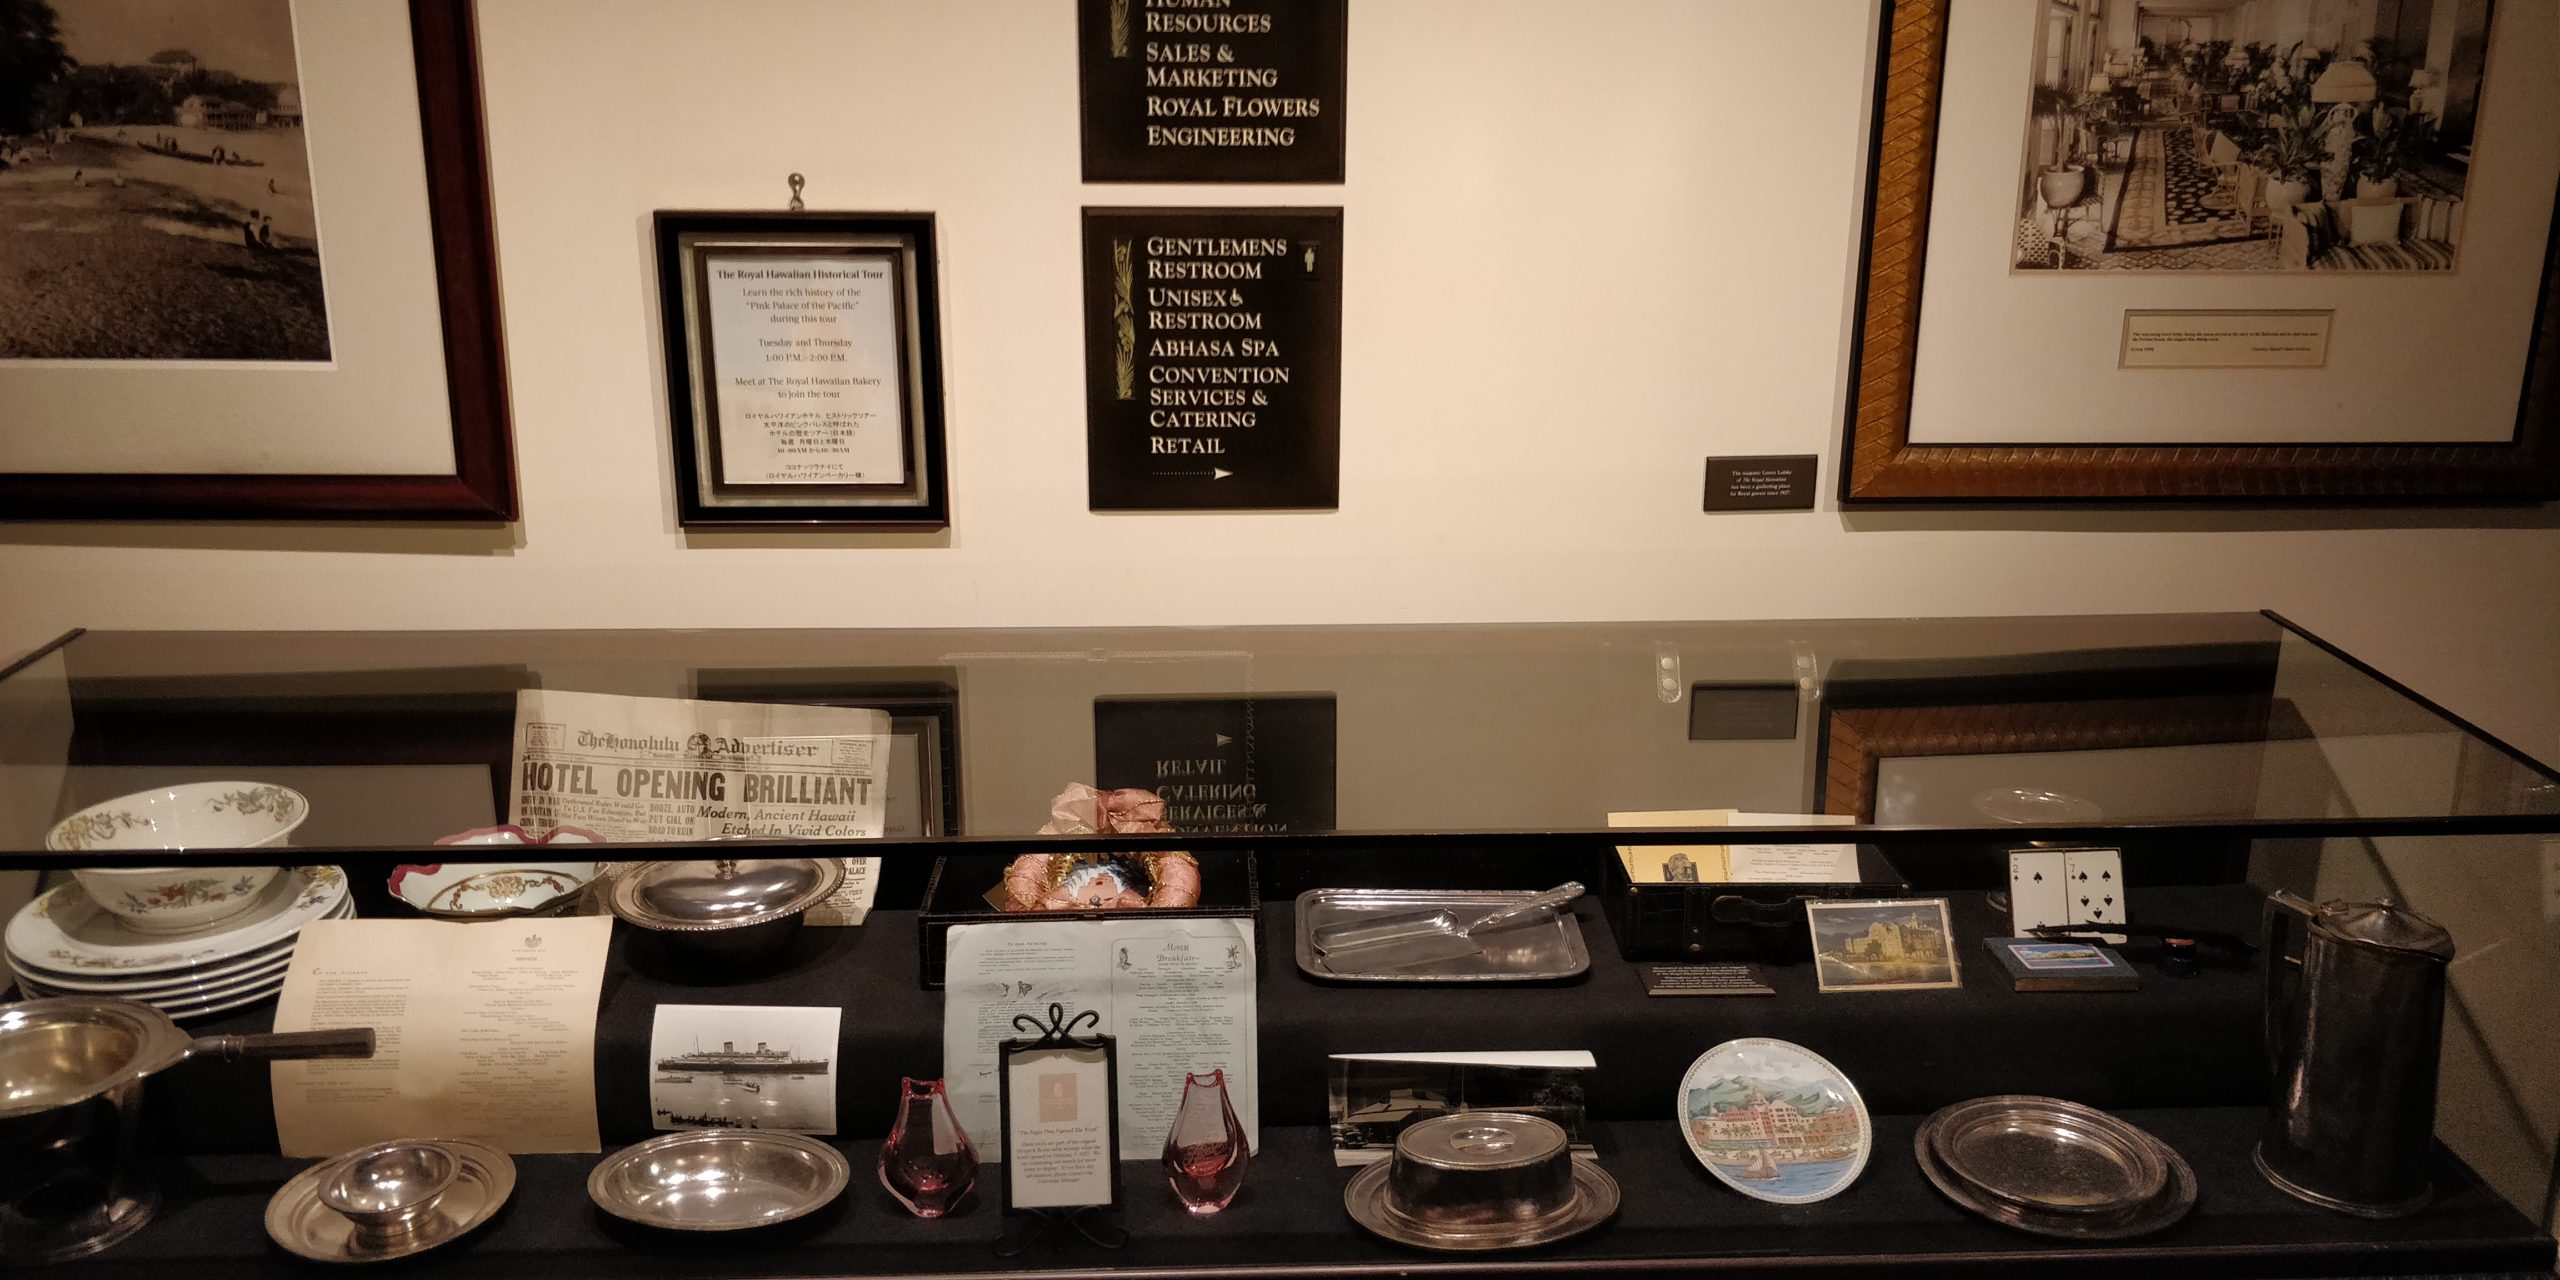 PICTURE OF ORIGINAL ARTIFACTS IN GLASS CASING